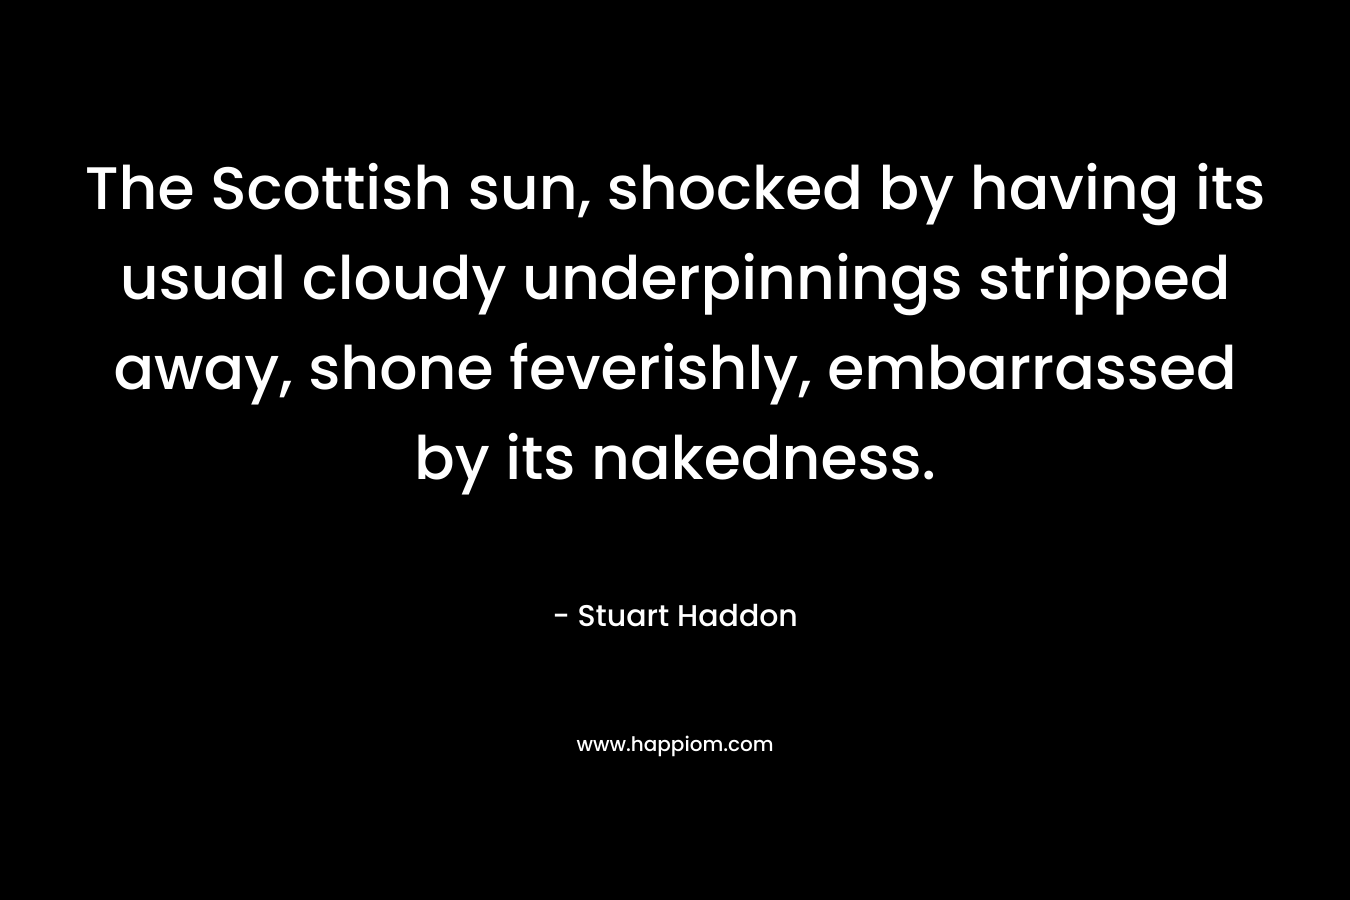 The Scottish sun, shocked by having its usual cloudy underpinnings stripped away, shone feverishly, embarrassed by its nakedness. – Stuart Haddon